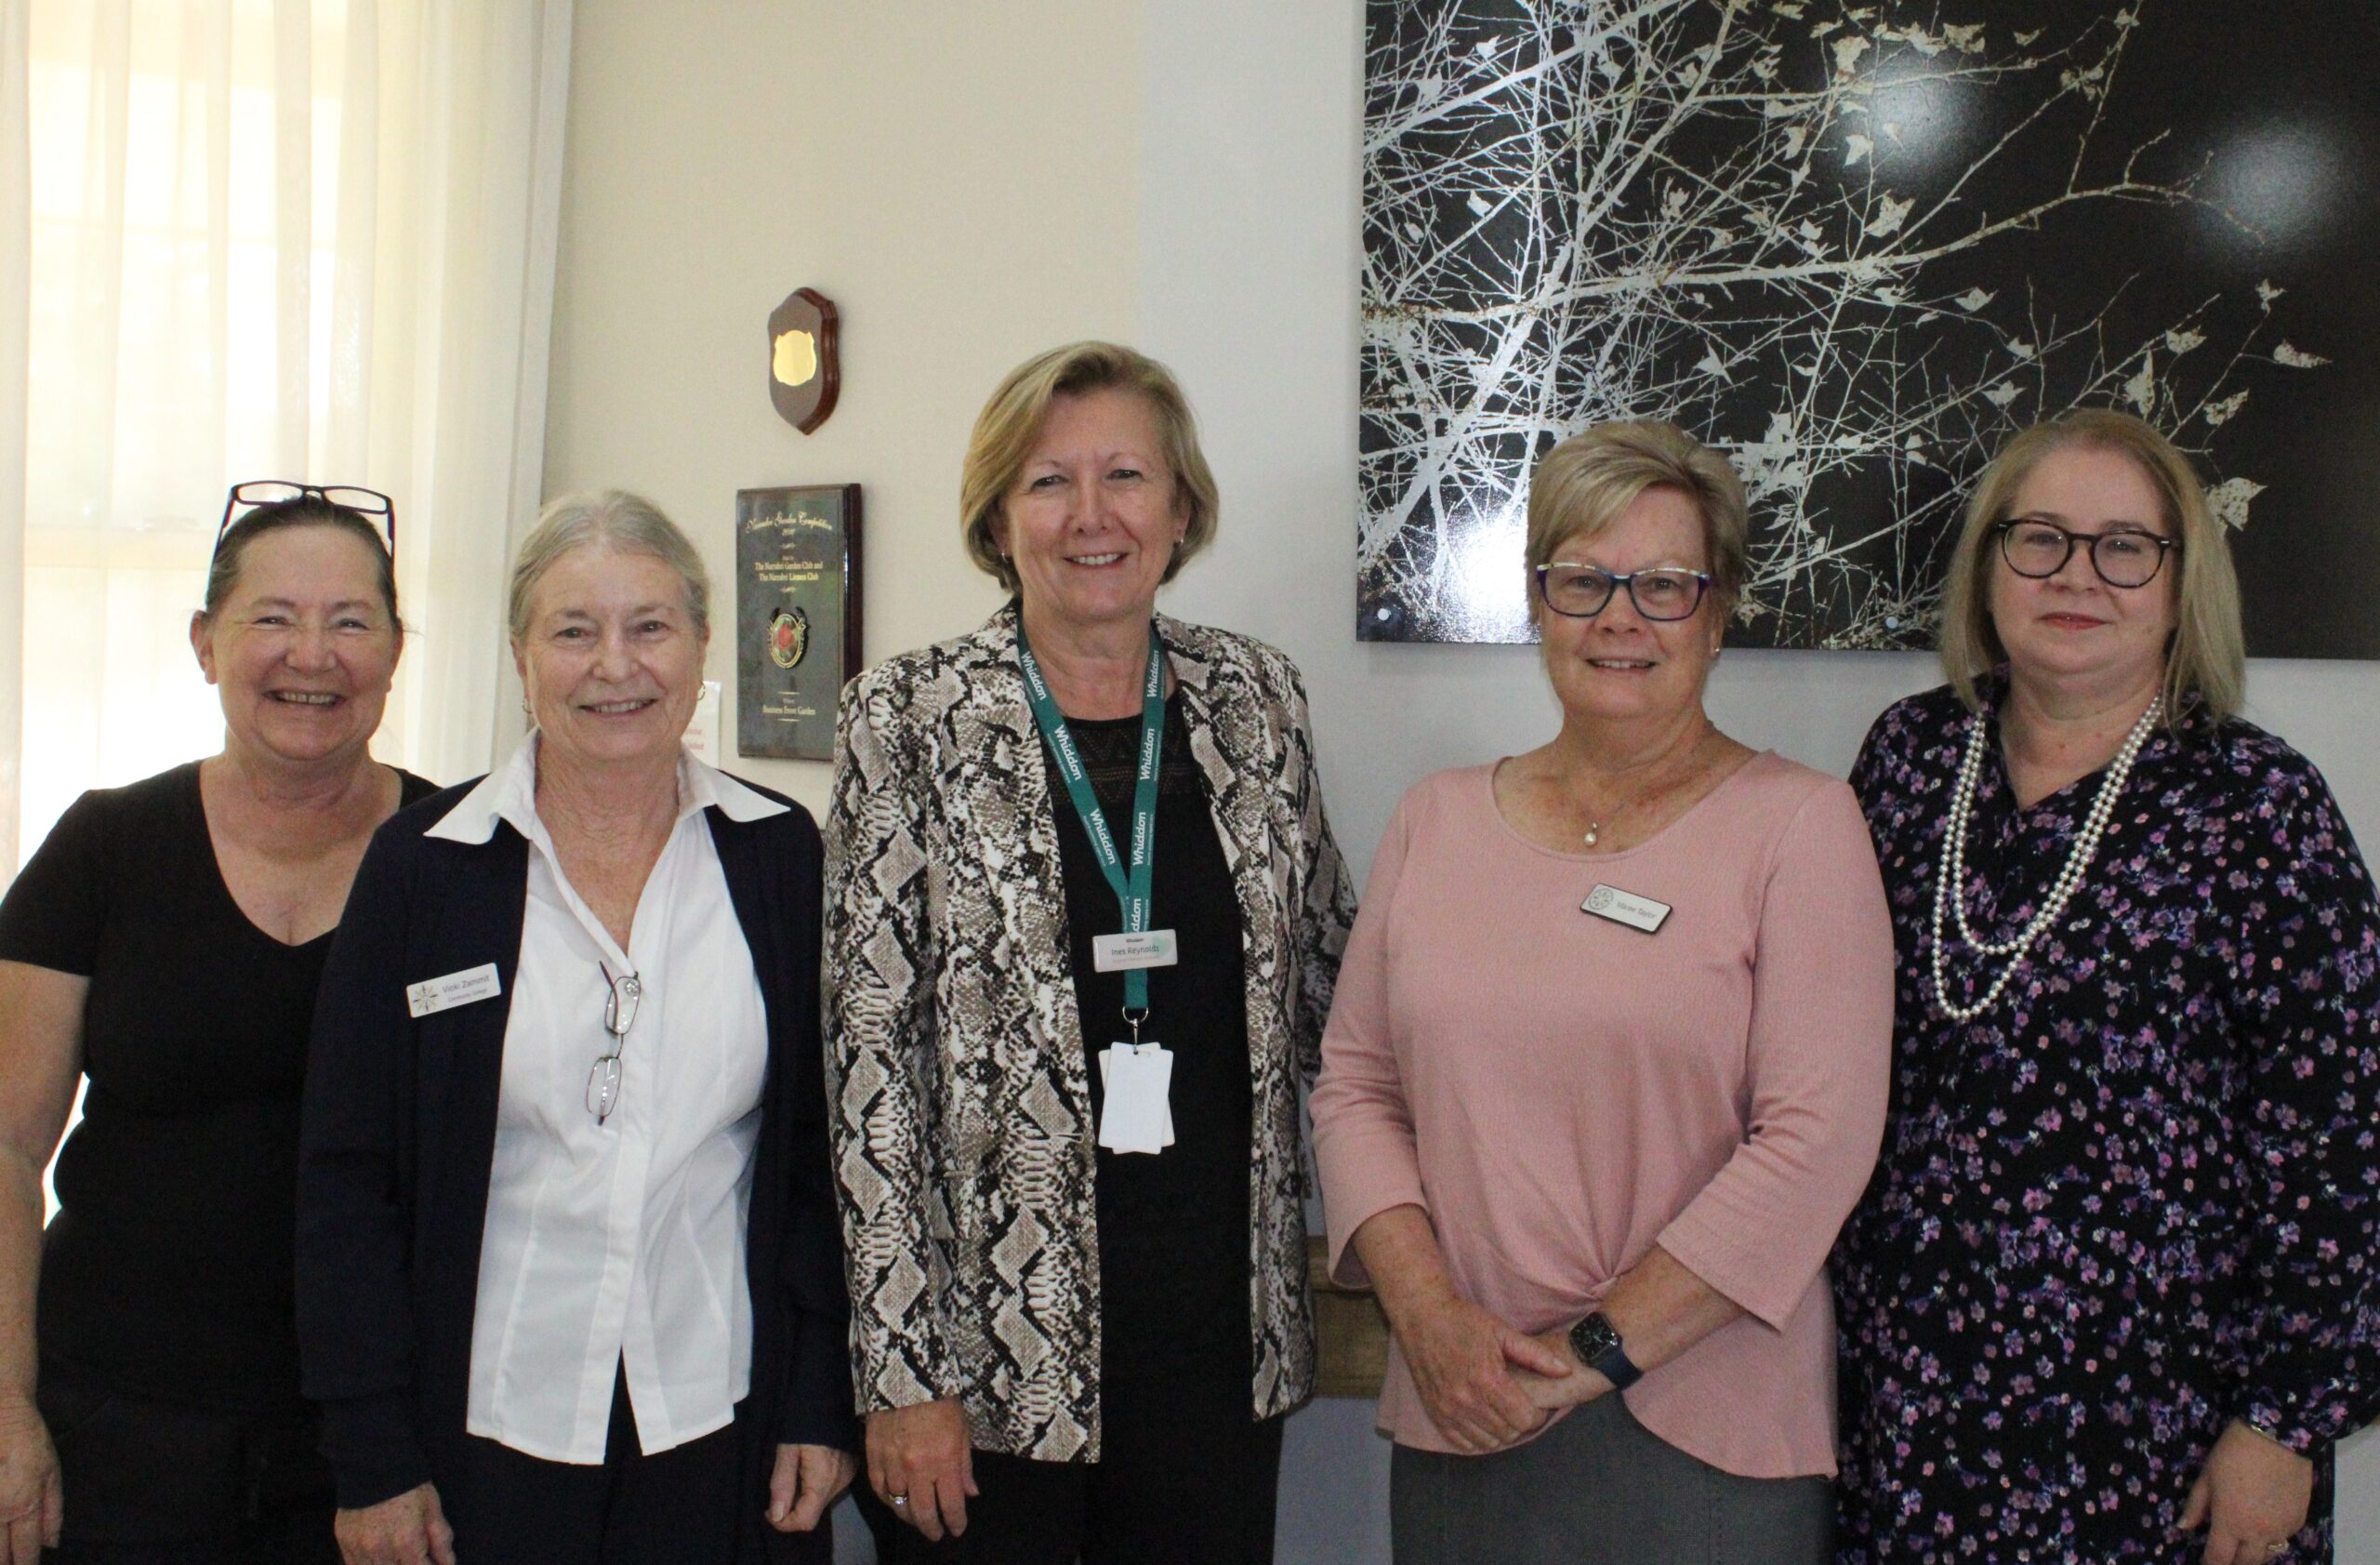 The Community College coordination team: Di Pinazza (head chef, Area North West), Vicki Zammit (VET manager, Community College Northern Inland), Ines Reynolds (regional manager Whiddon Group), Maree Taylor (trainer, Community College Northern Inland) and Rachael Anderson (Narrabri Campus coordinator, Community College Northern Inland).